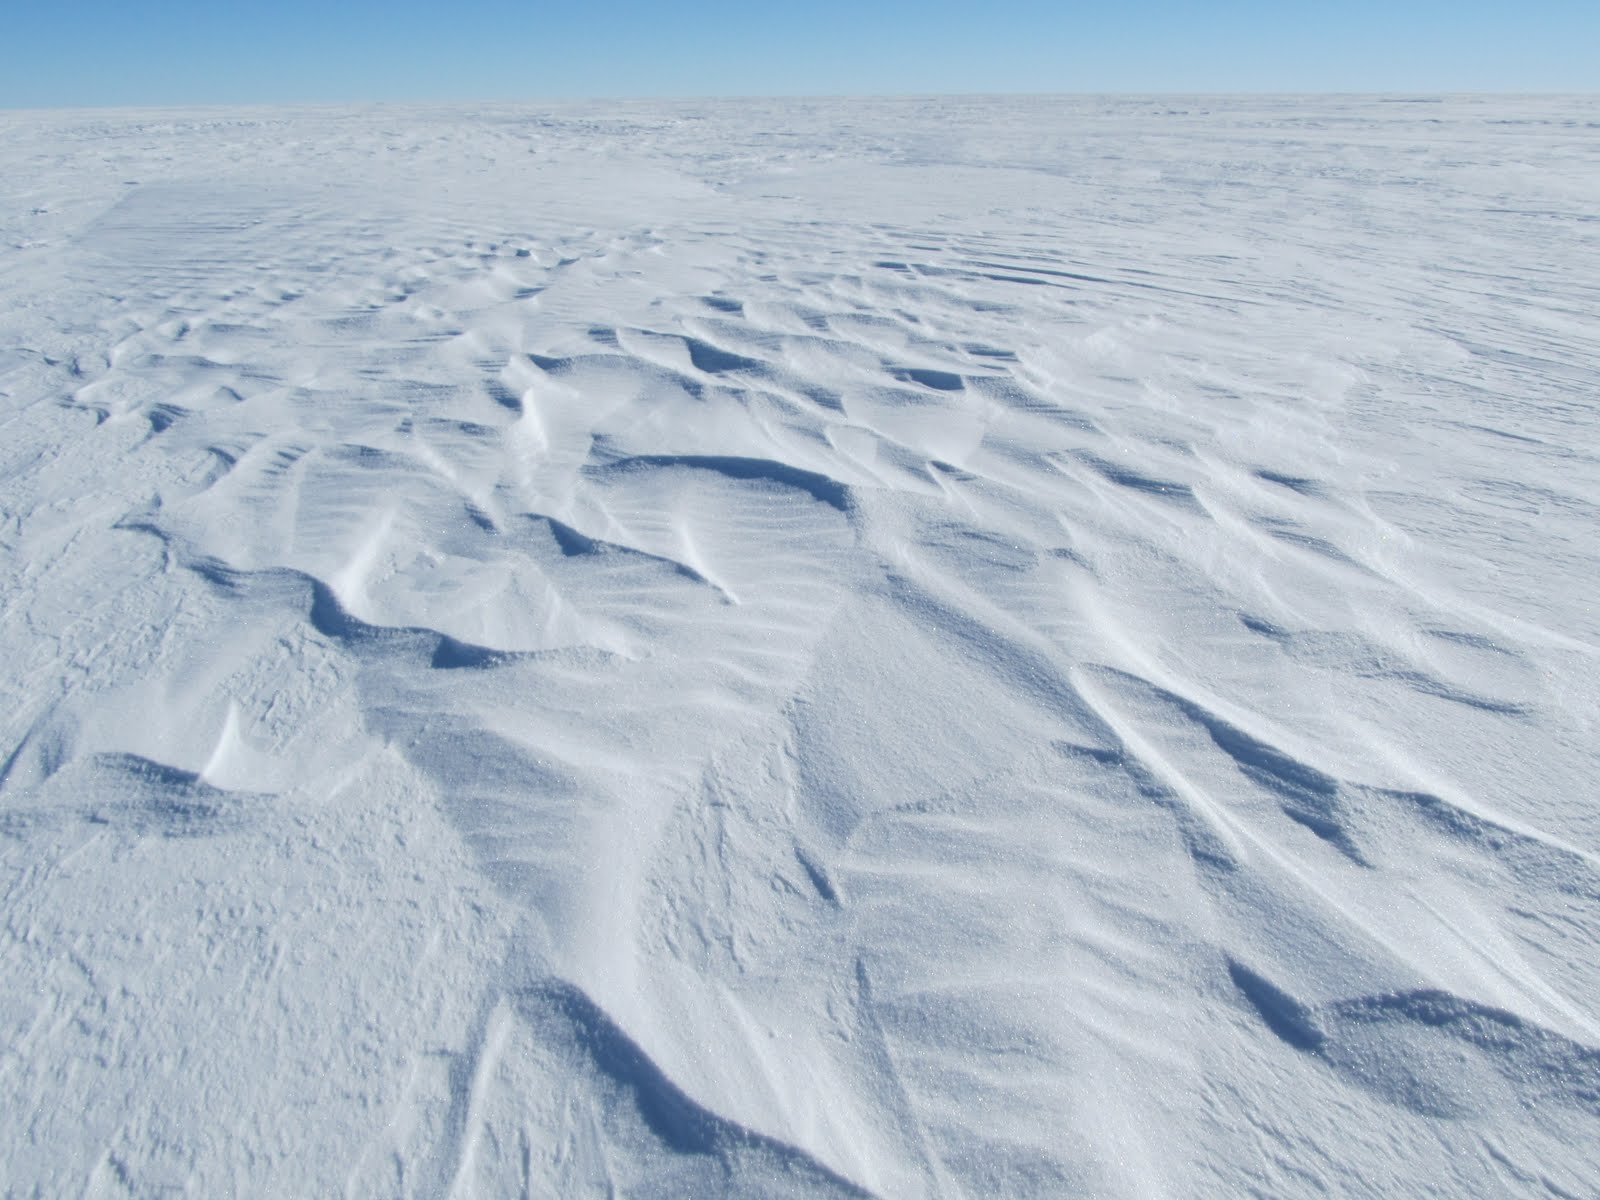 West Antarctic Ice Sheet Science Traverse: The Ice